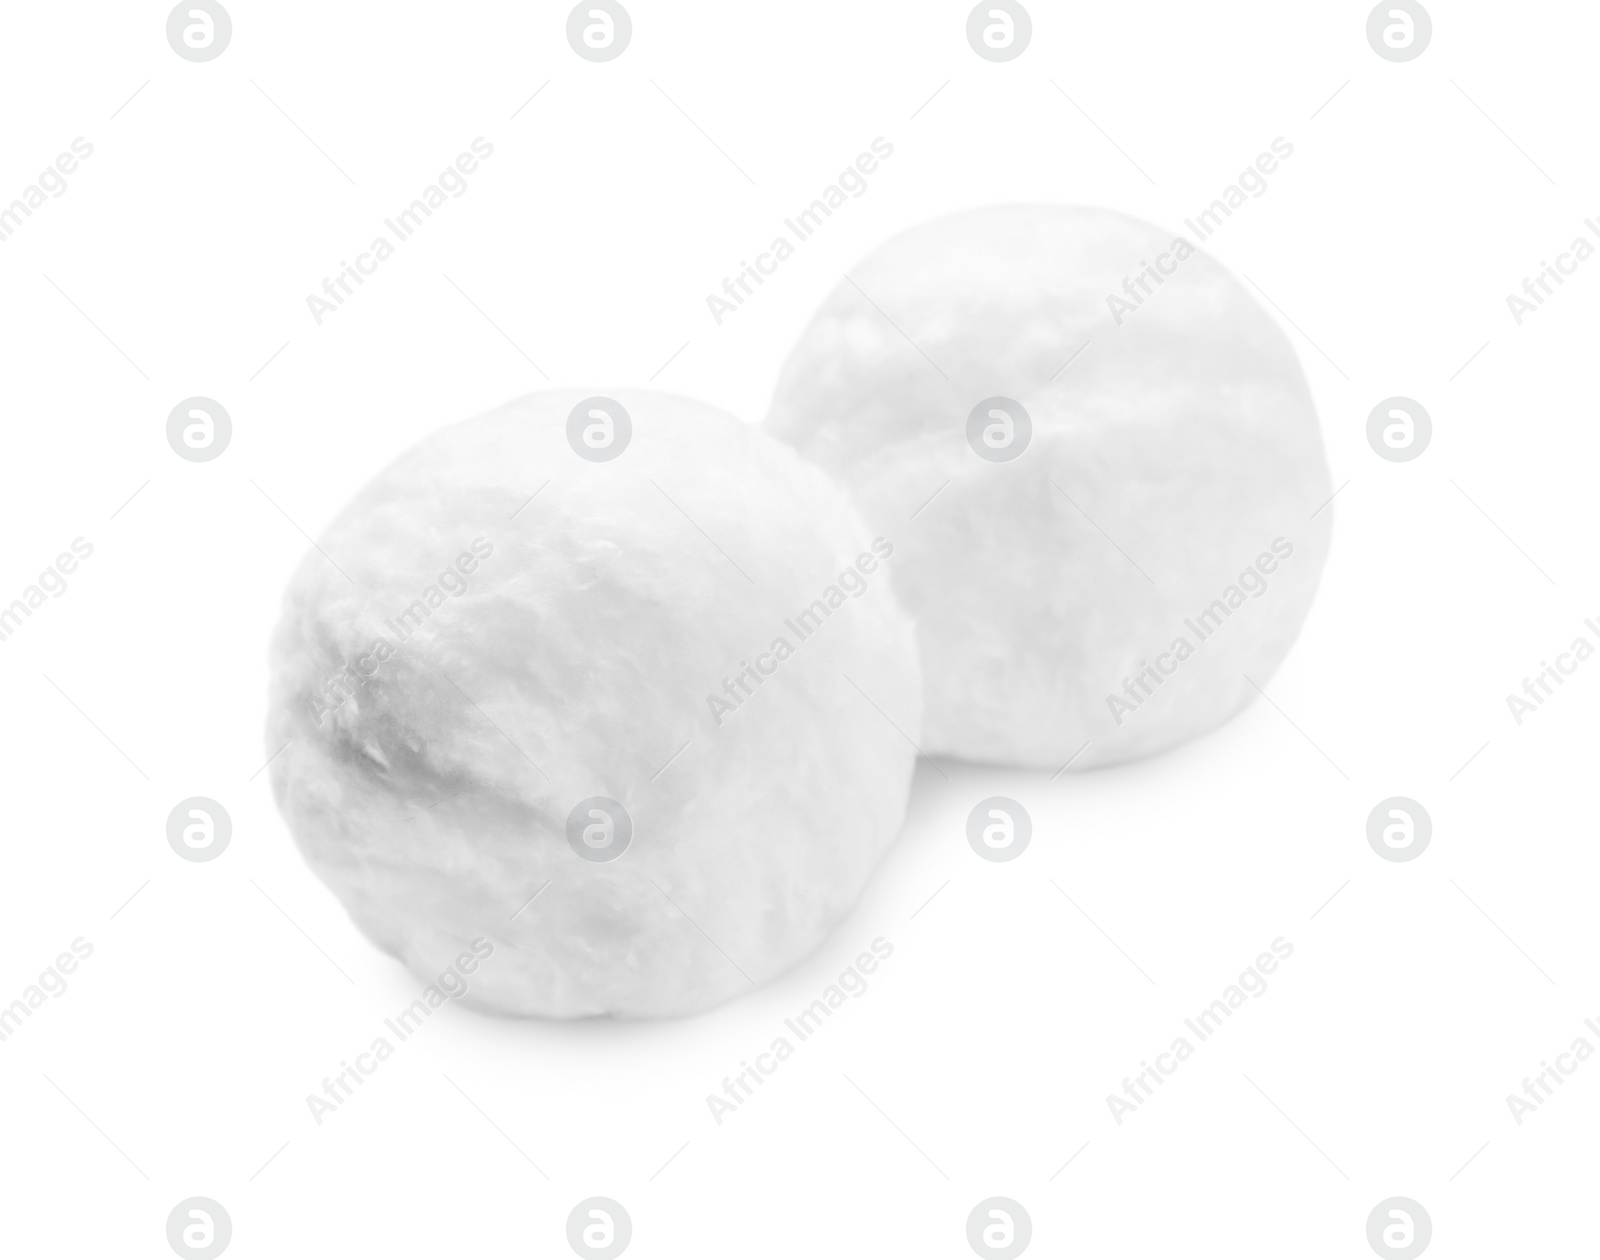 Photo of Balls of clean cotton wool isolated on white